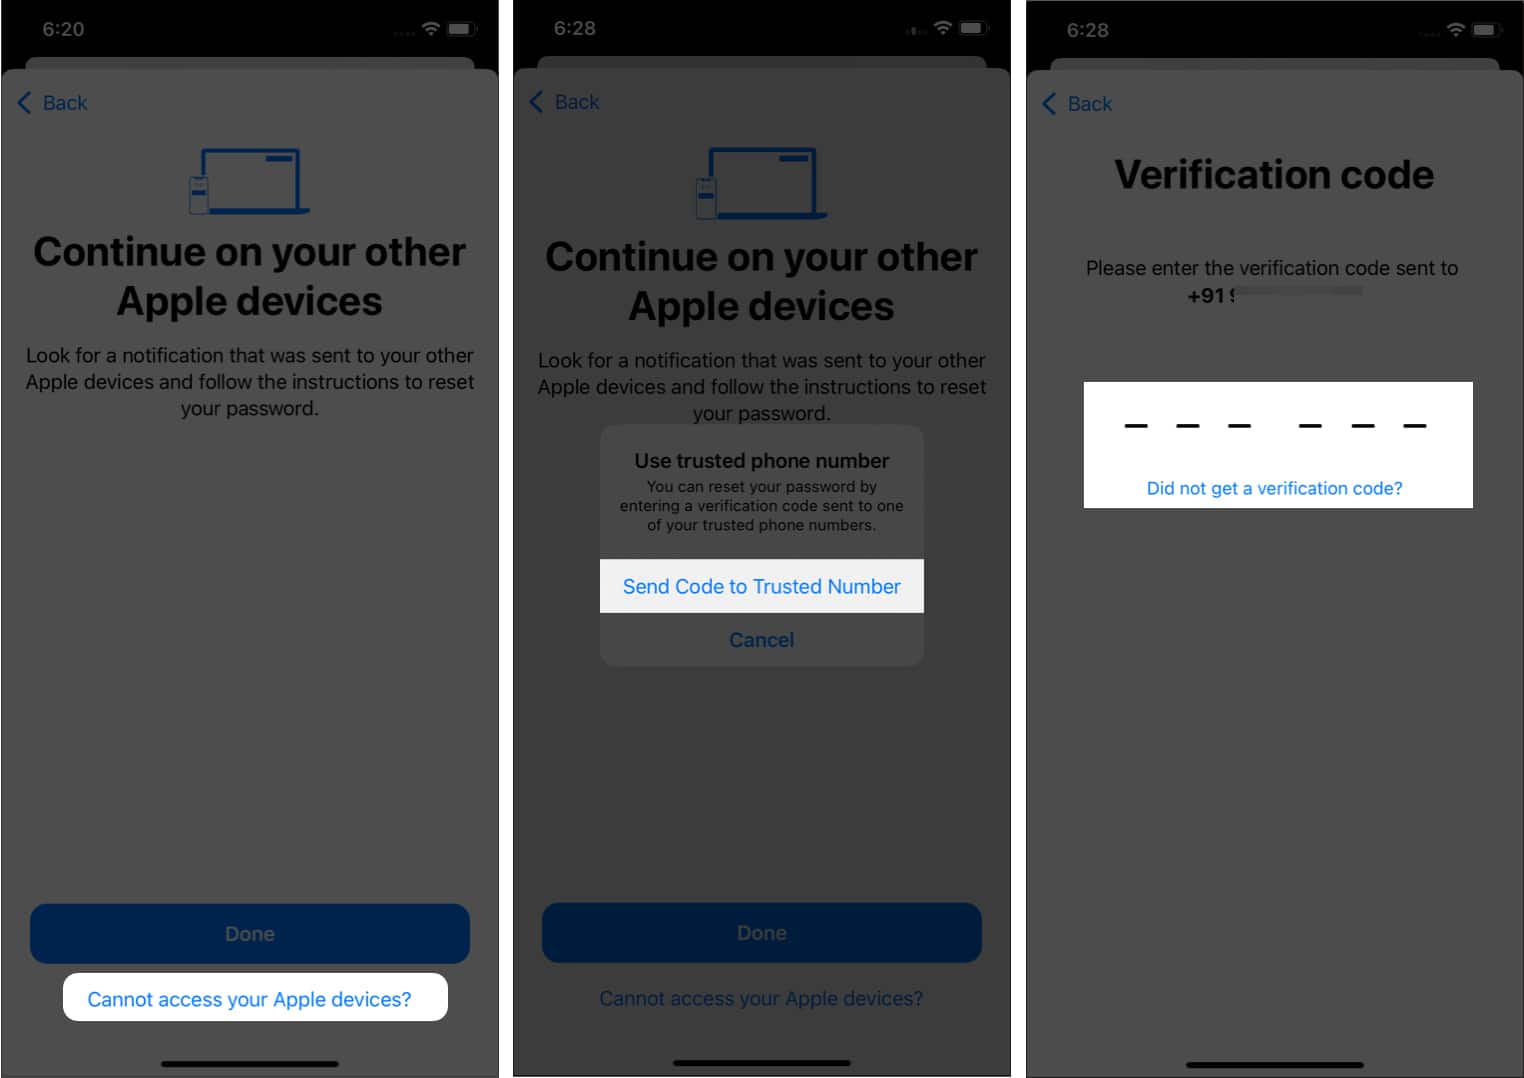 Enter the Verification code in Apple support